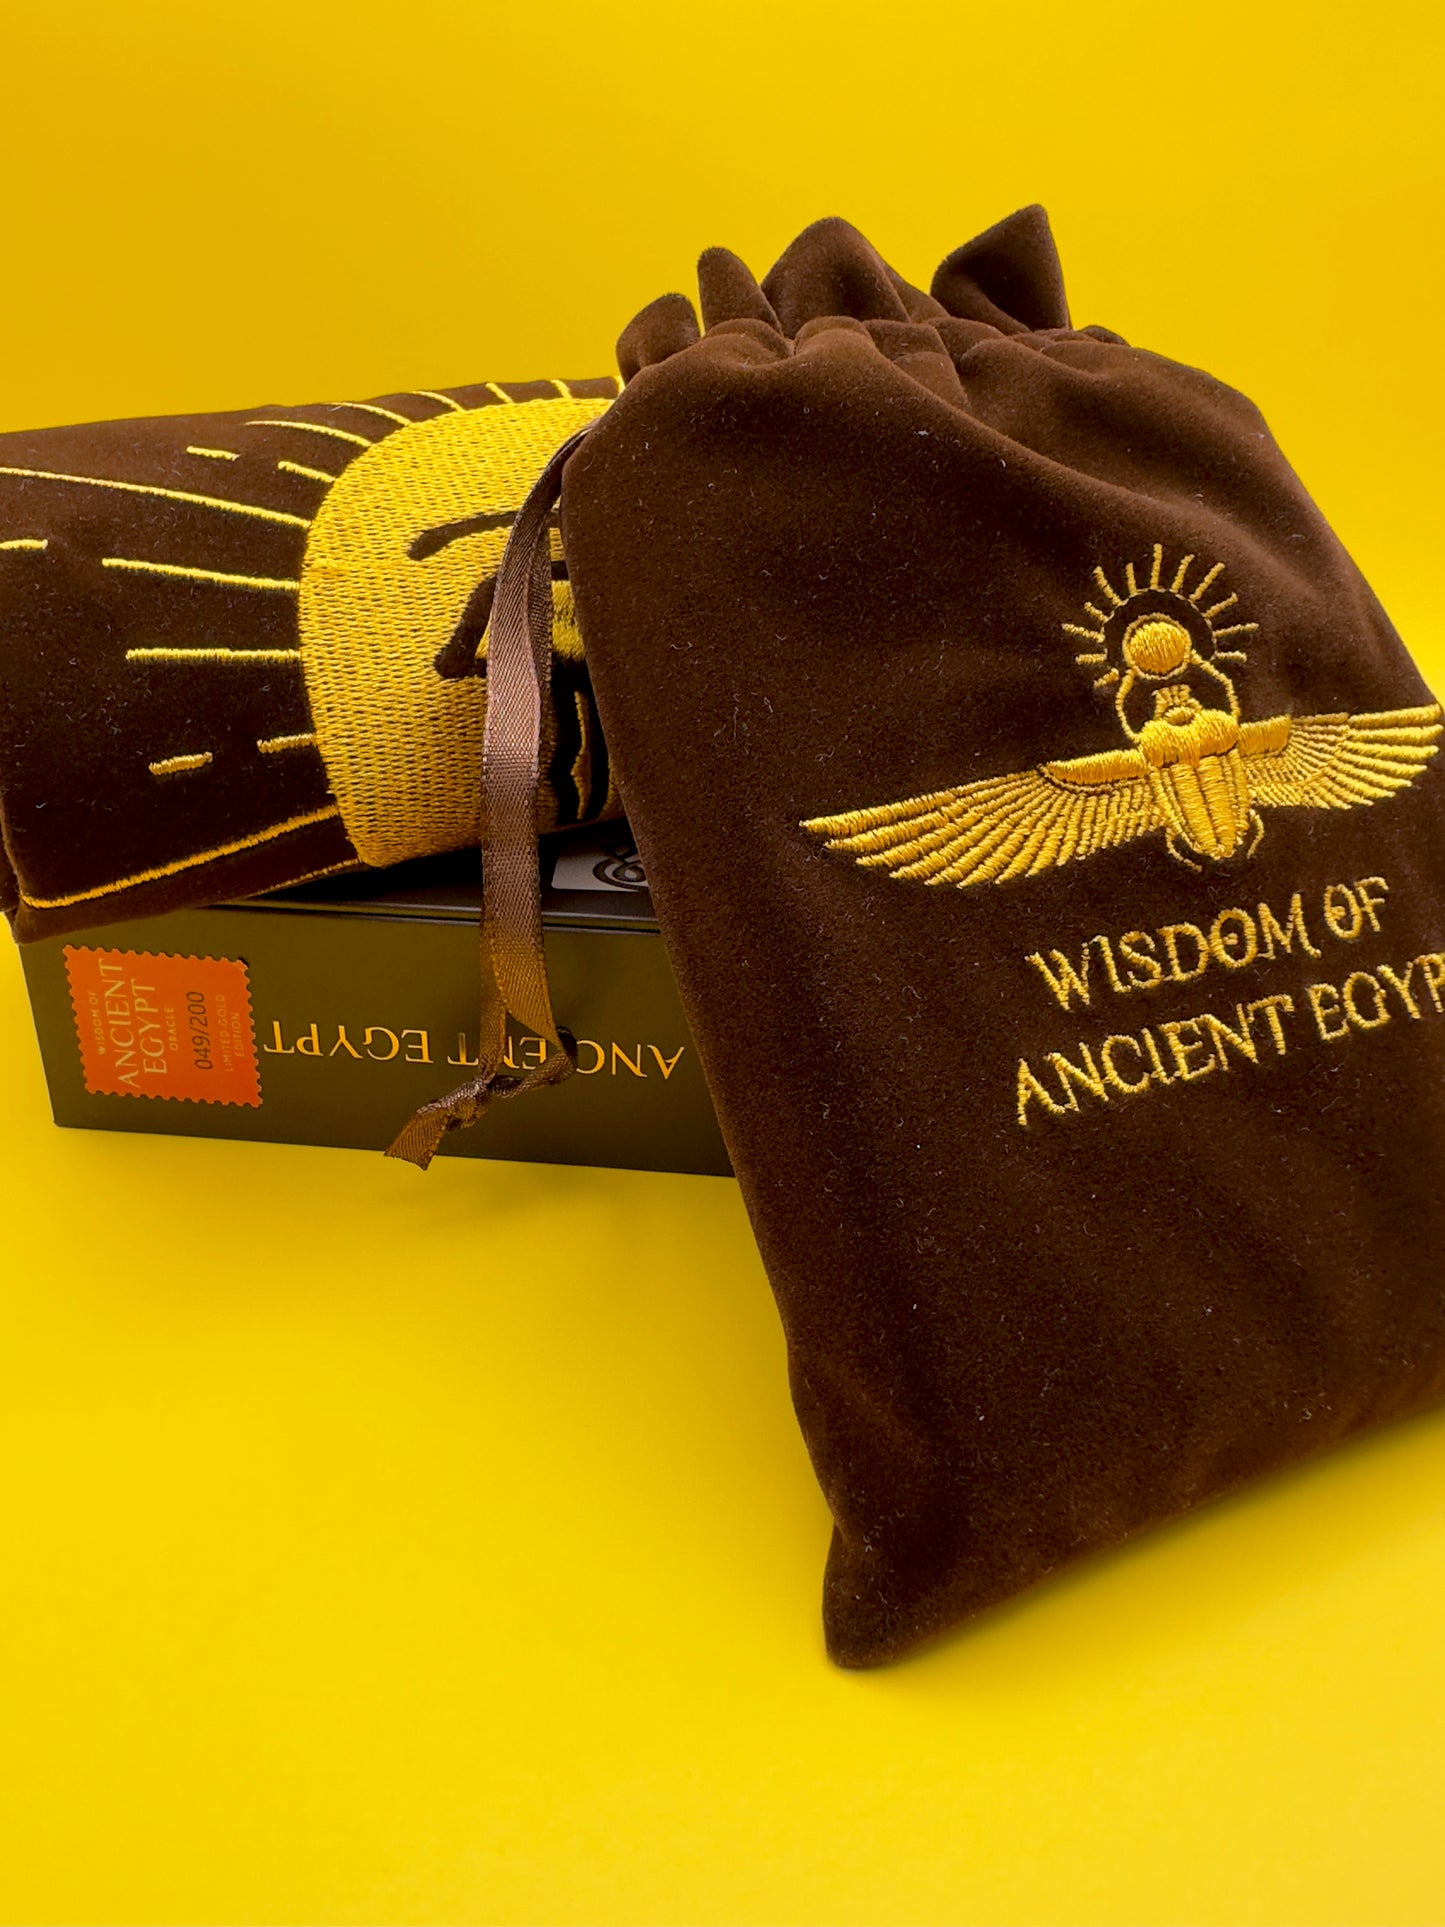 Limited Edition - WISDOM OF ANCIENT EGYPT ORACLE